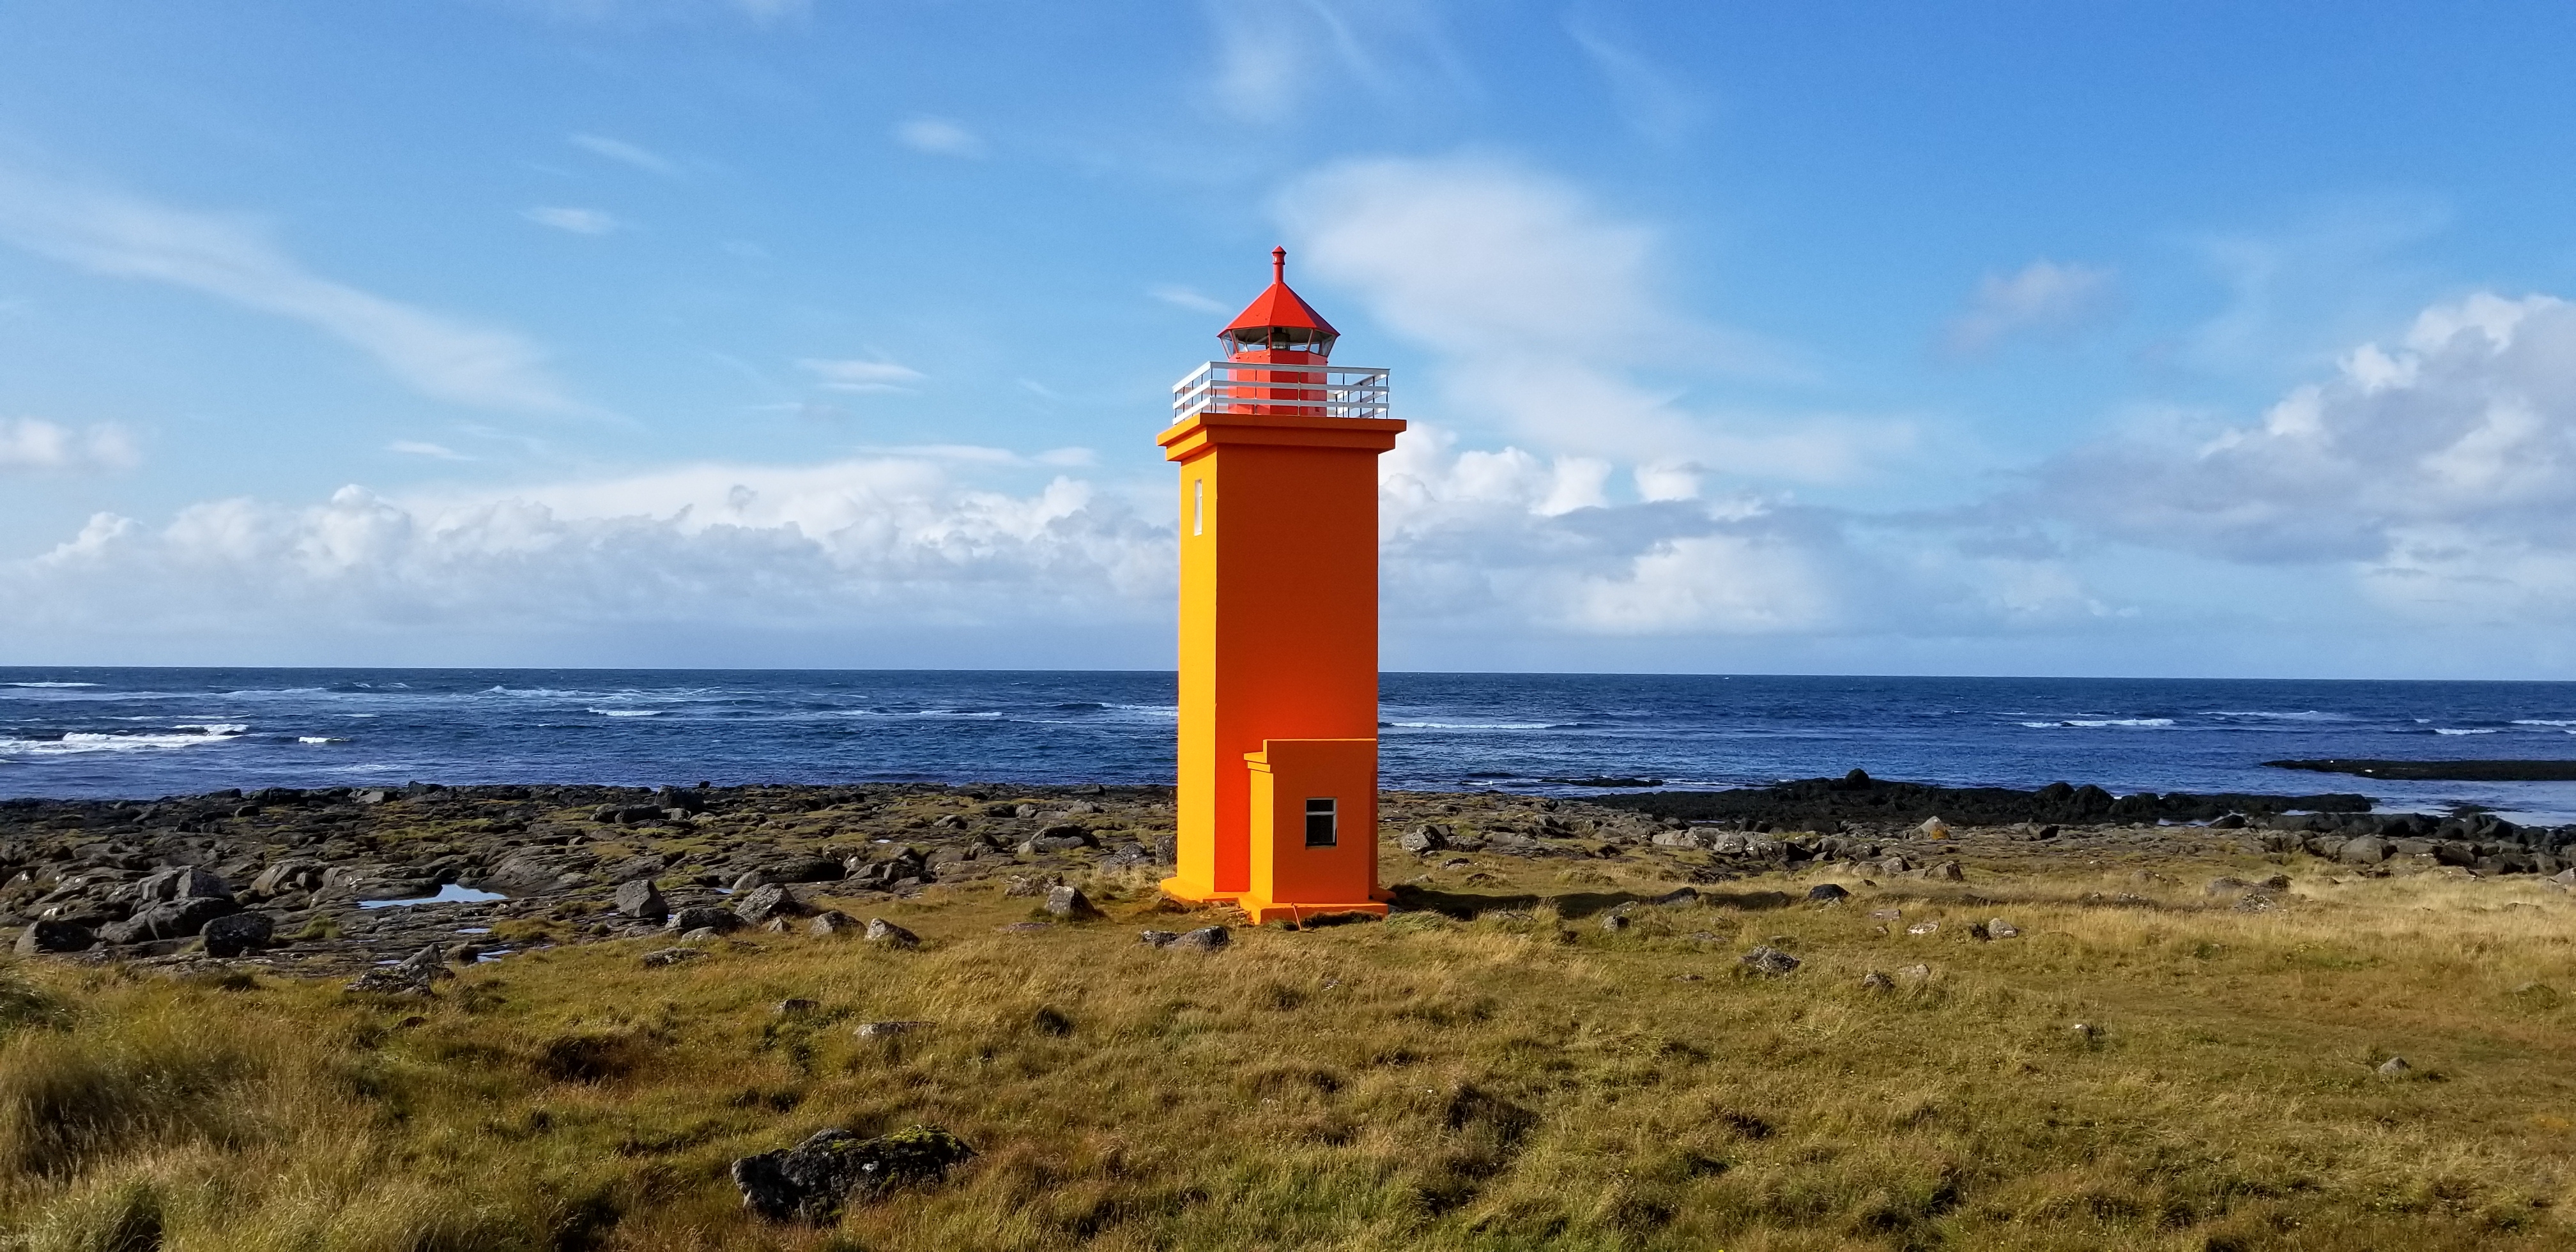 The Stafnesviti lighthouse is west of the marker.